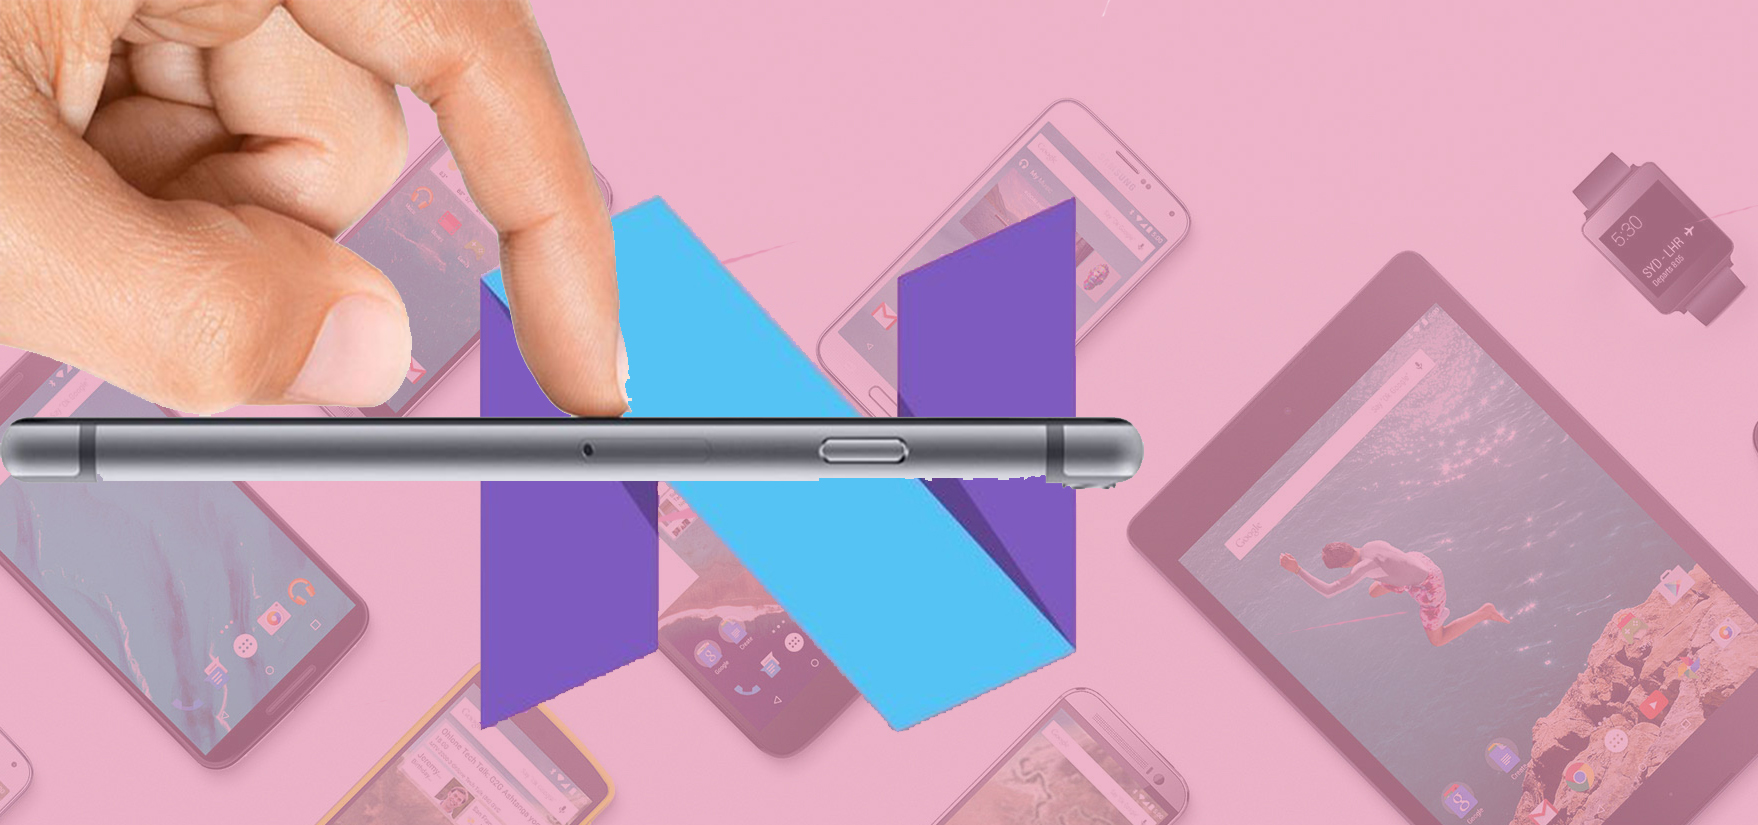 Android N will be enabled for Force Touch capabilities 1